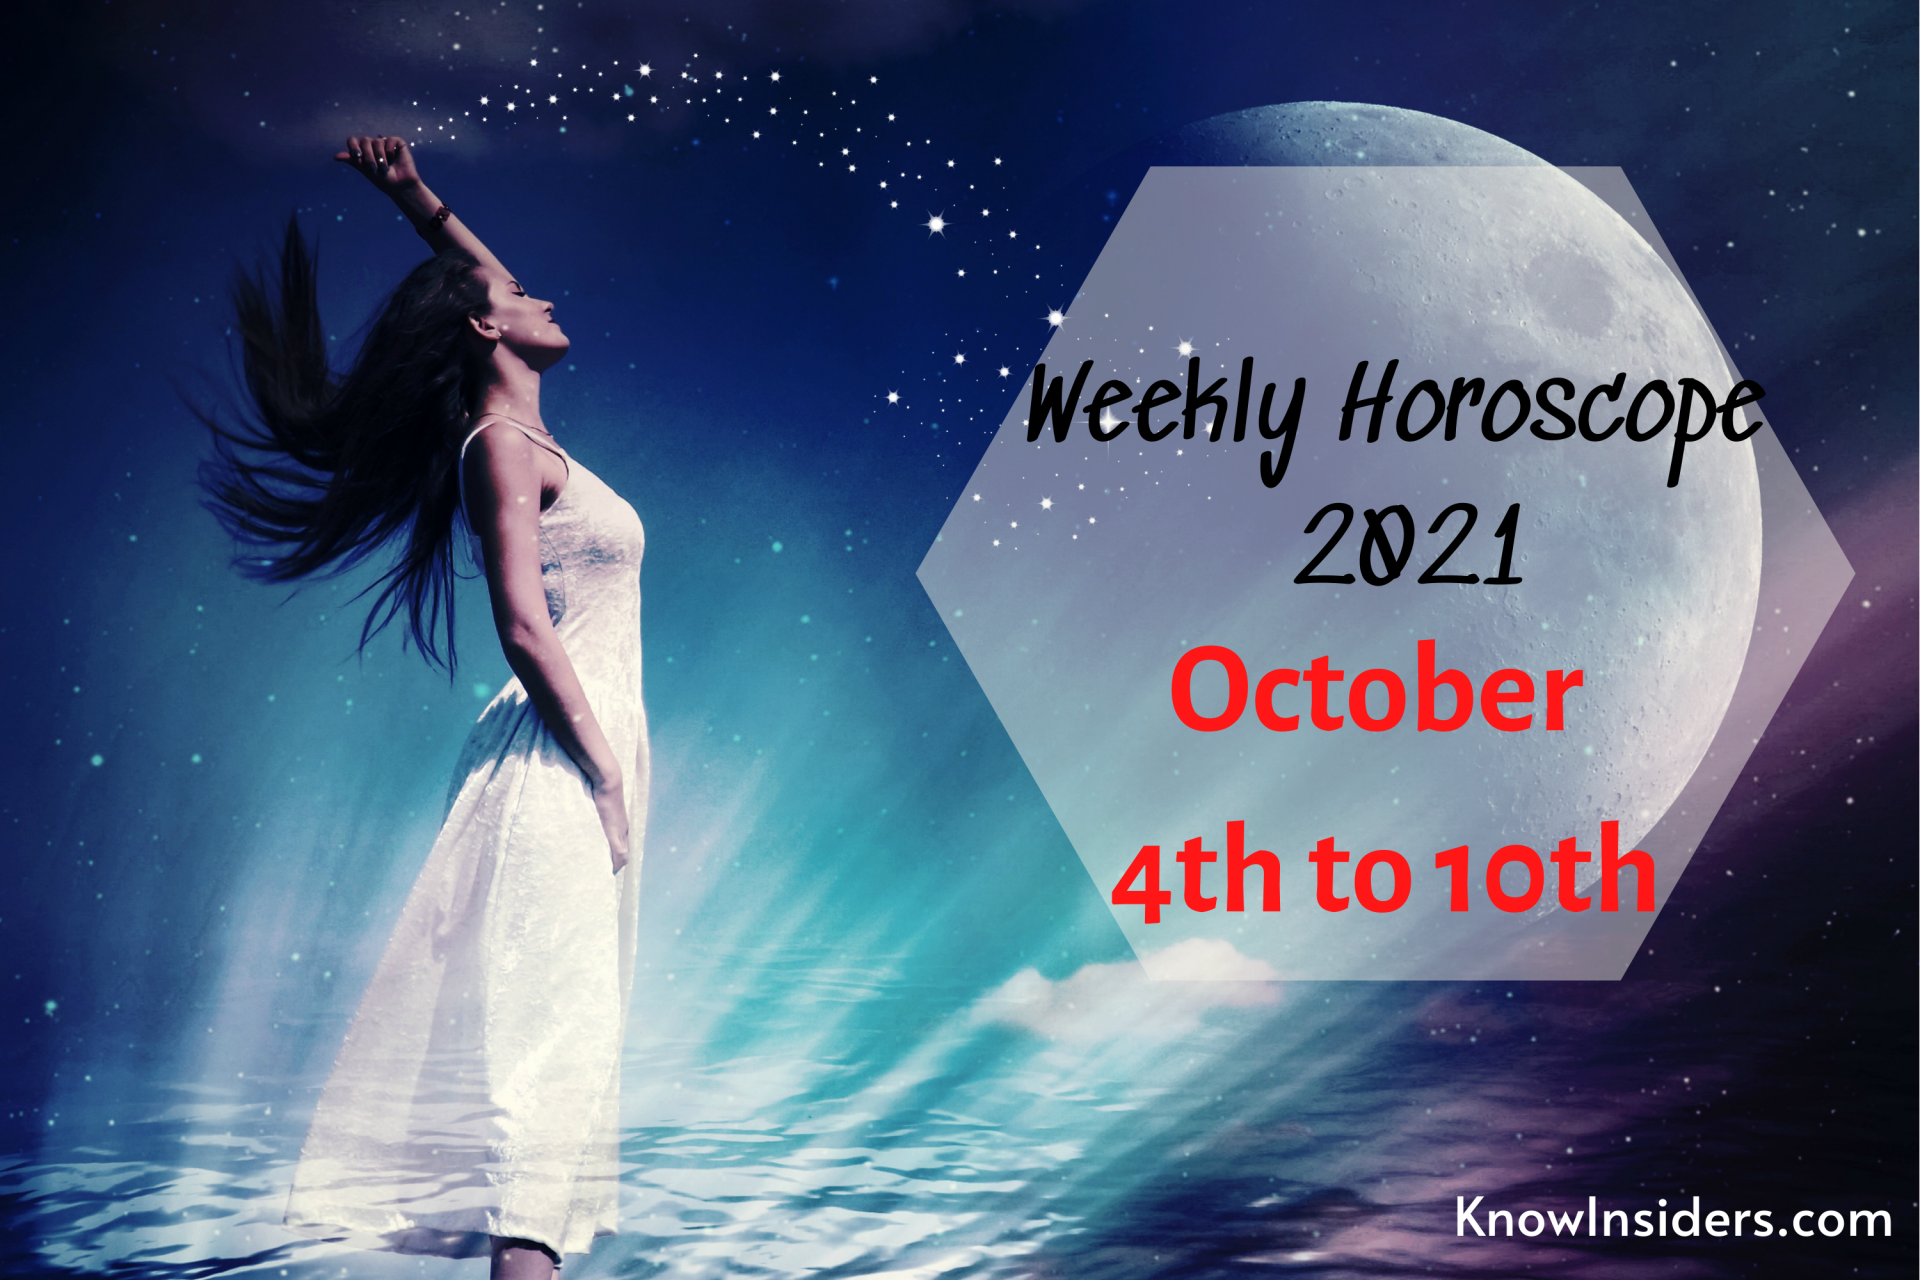 Your Weekly Horoscope 4 to 10 October 2021: Prediction for Each Zodiac Sign